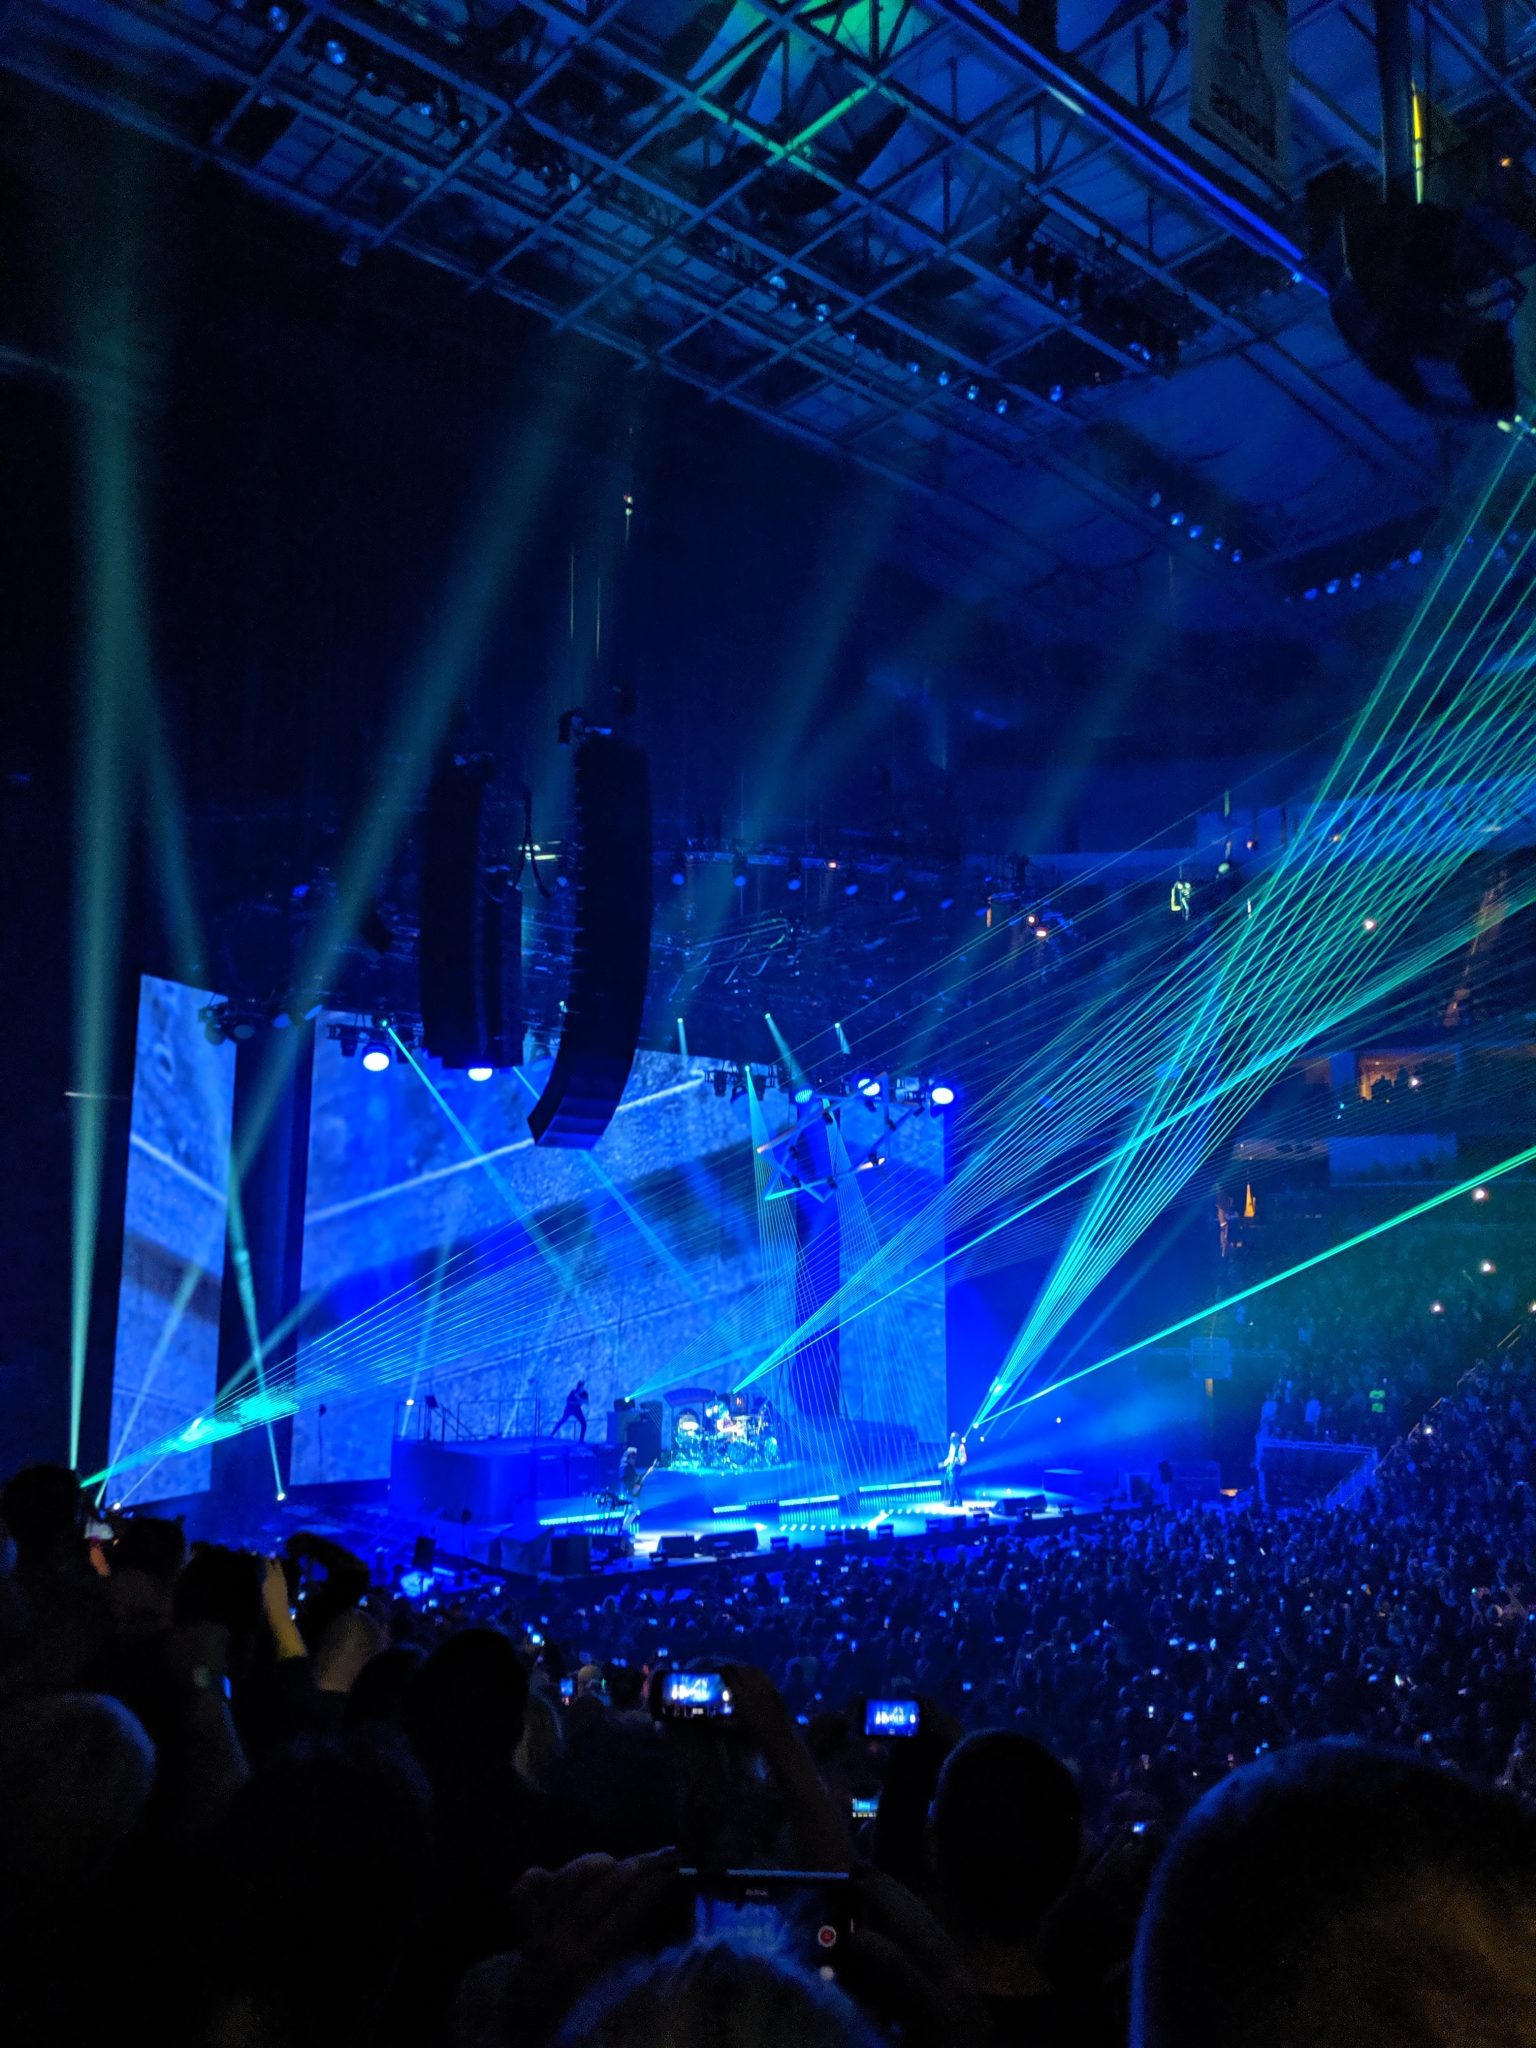 A concert stage shooting lights out into a dark arena.